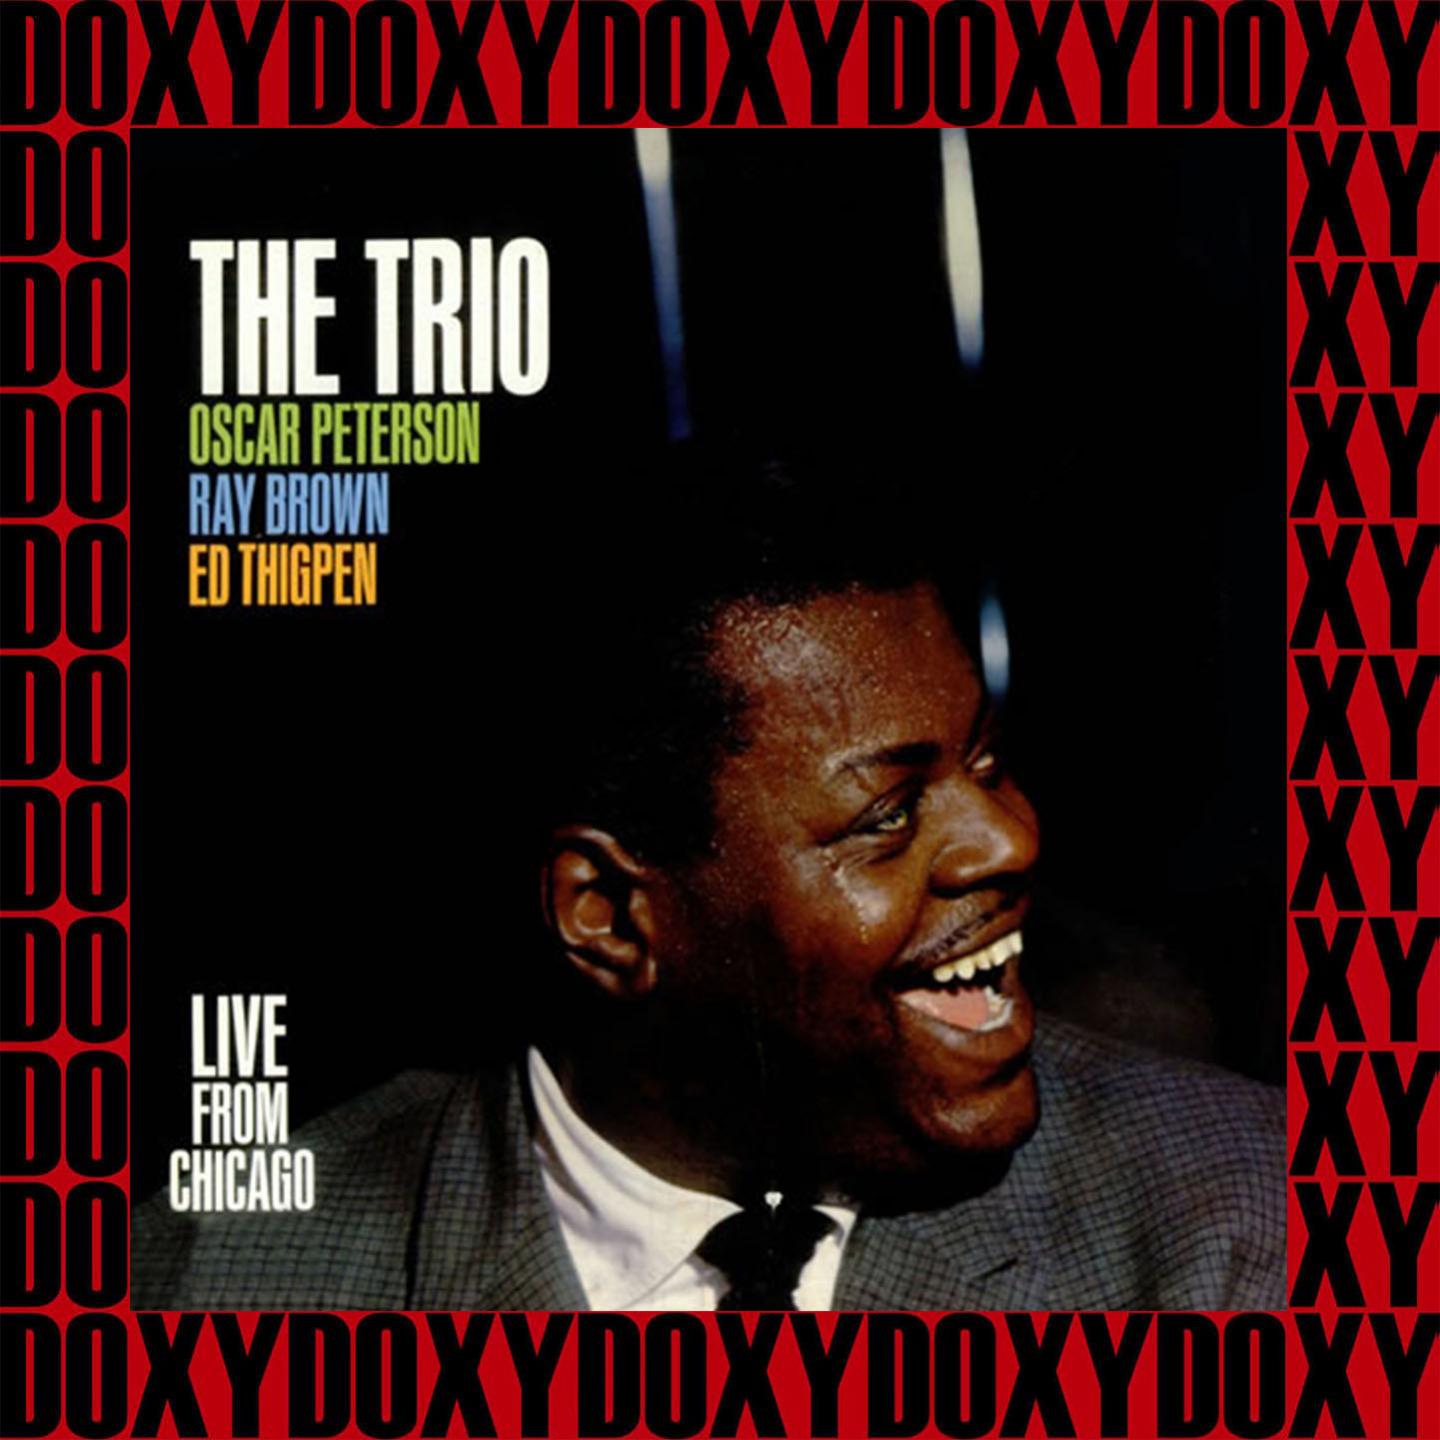 The Trio, Live From Chicago (Remastered Version) (Doxy Collection)